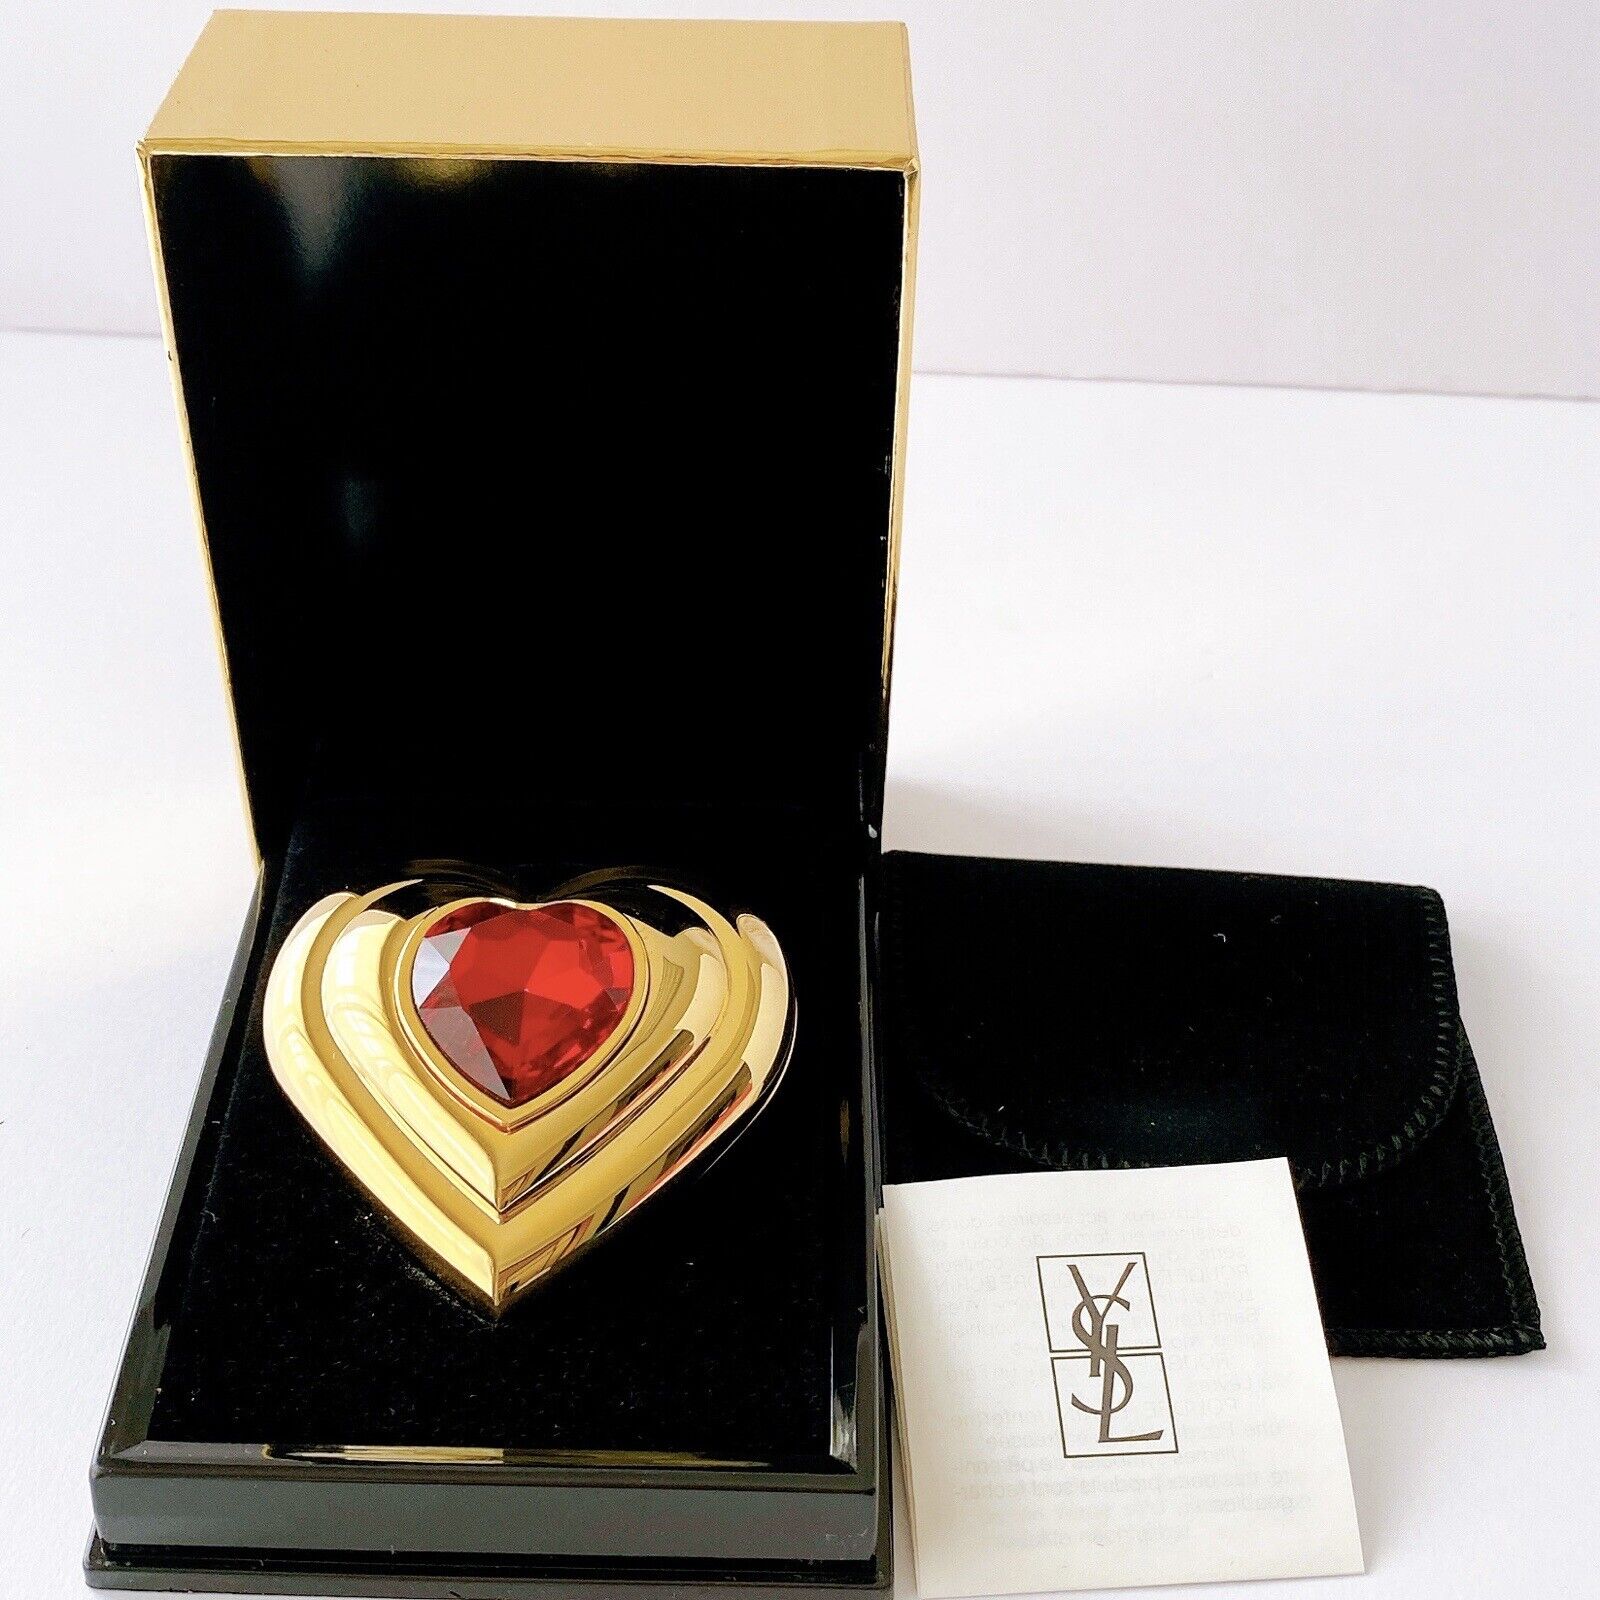 YVES SAINT LAURENT POUDRE ECRIN POWDER RED CRYSTAL JEWELED HEART COMPACT JAPAN